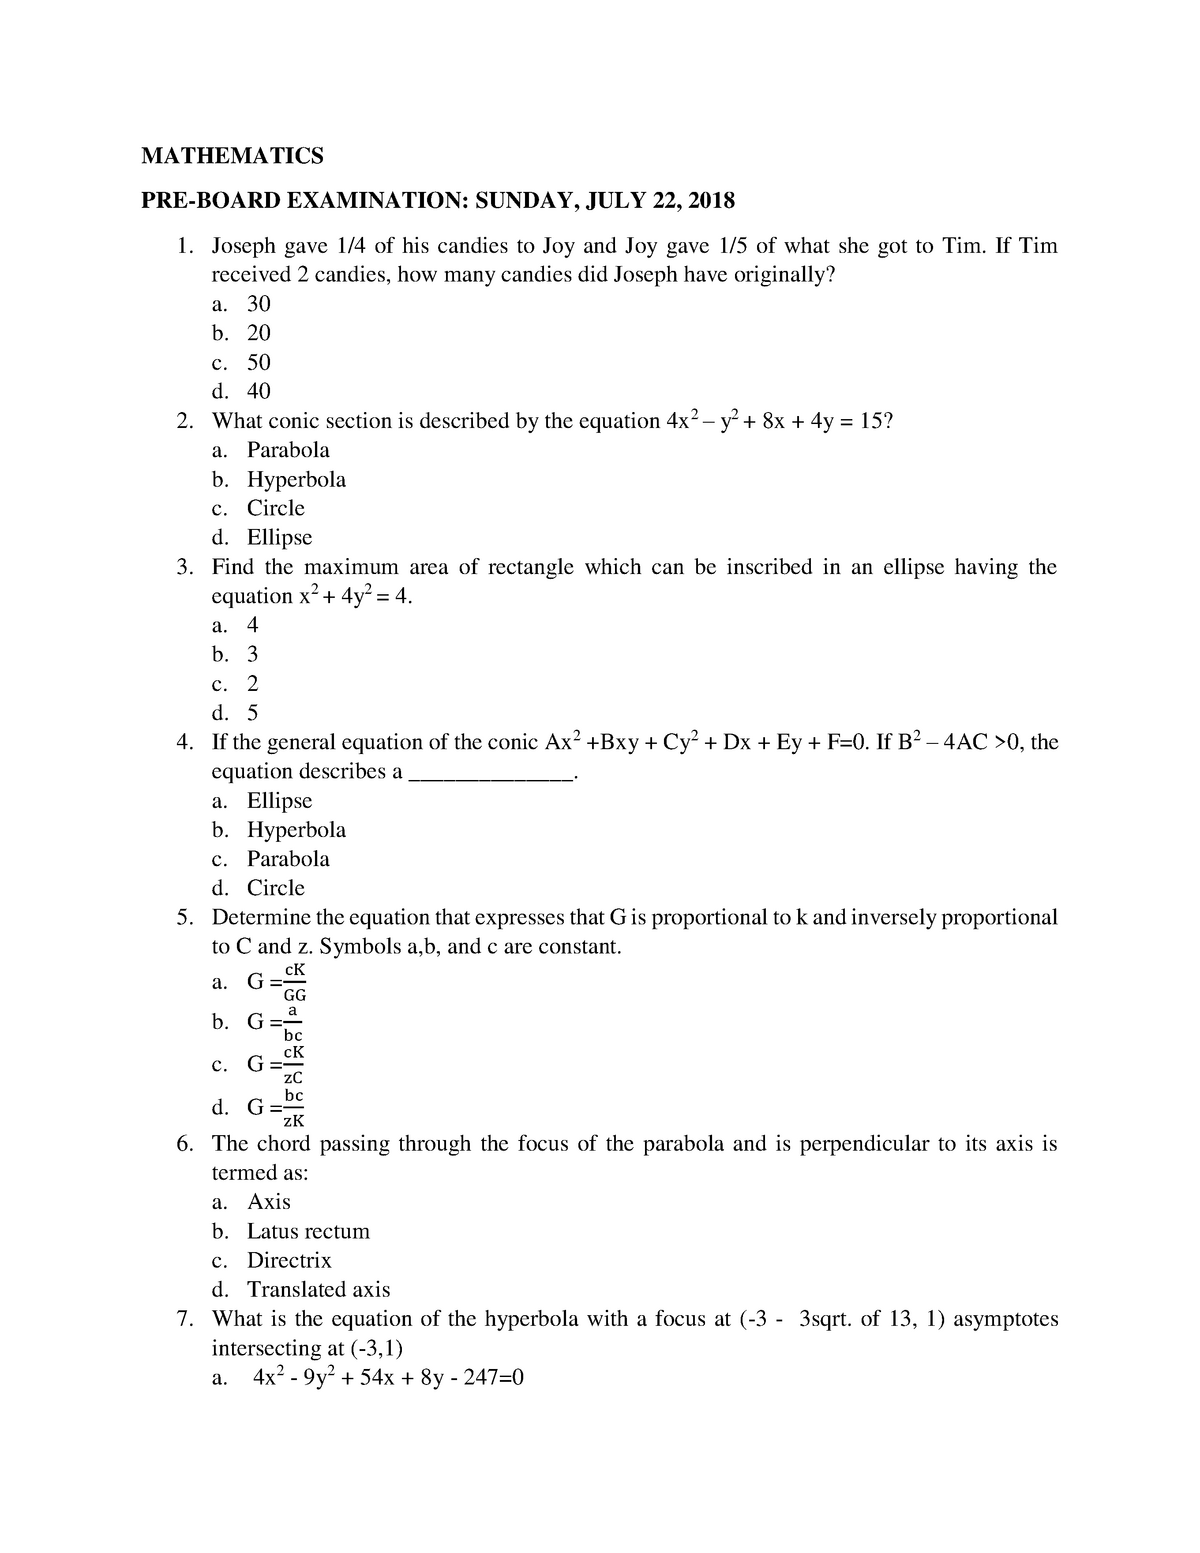 EXAM 2018, questions and answers - MATHEMATICS PRE-BOARD EXAMINATION ...